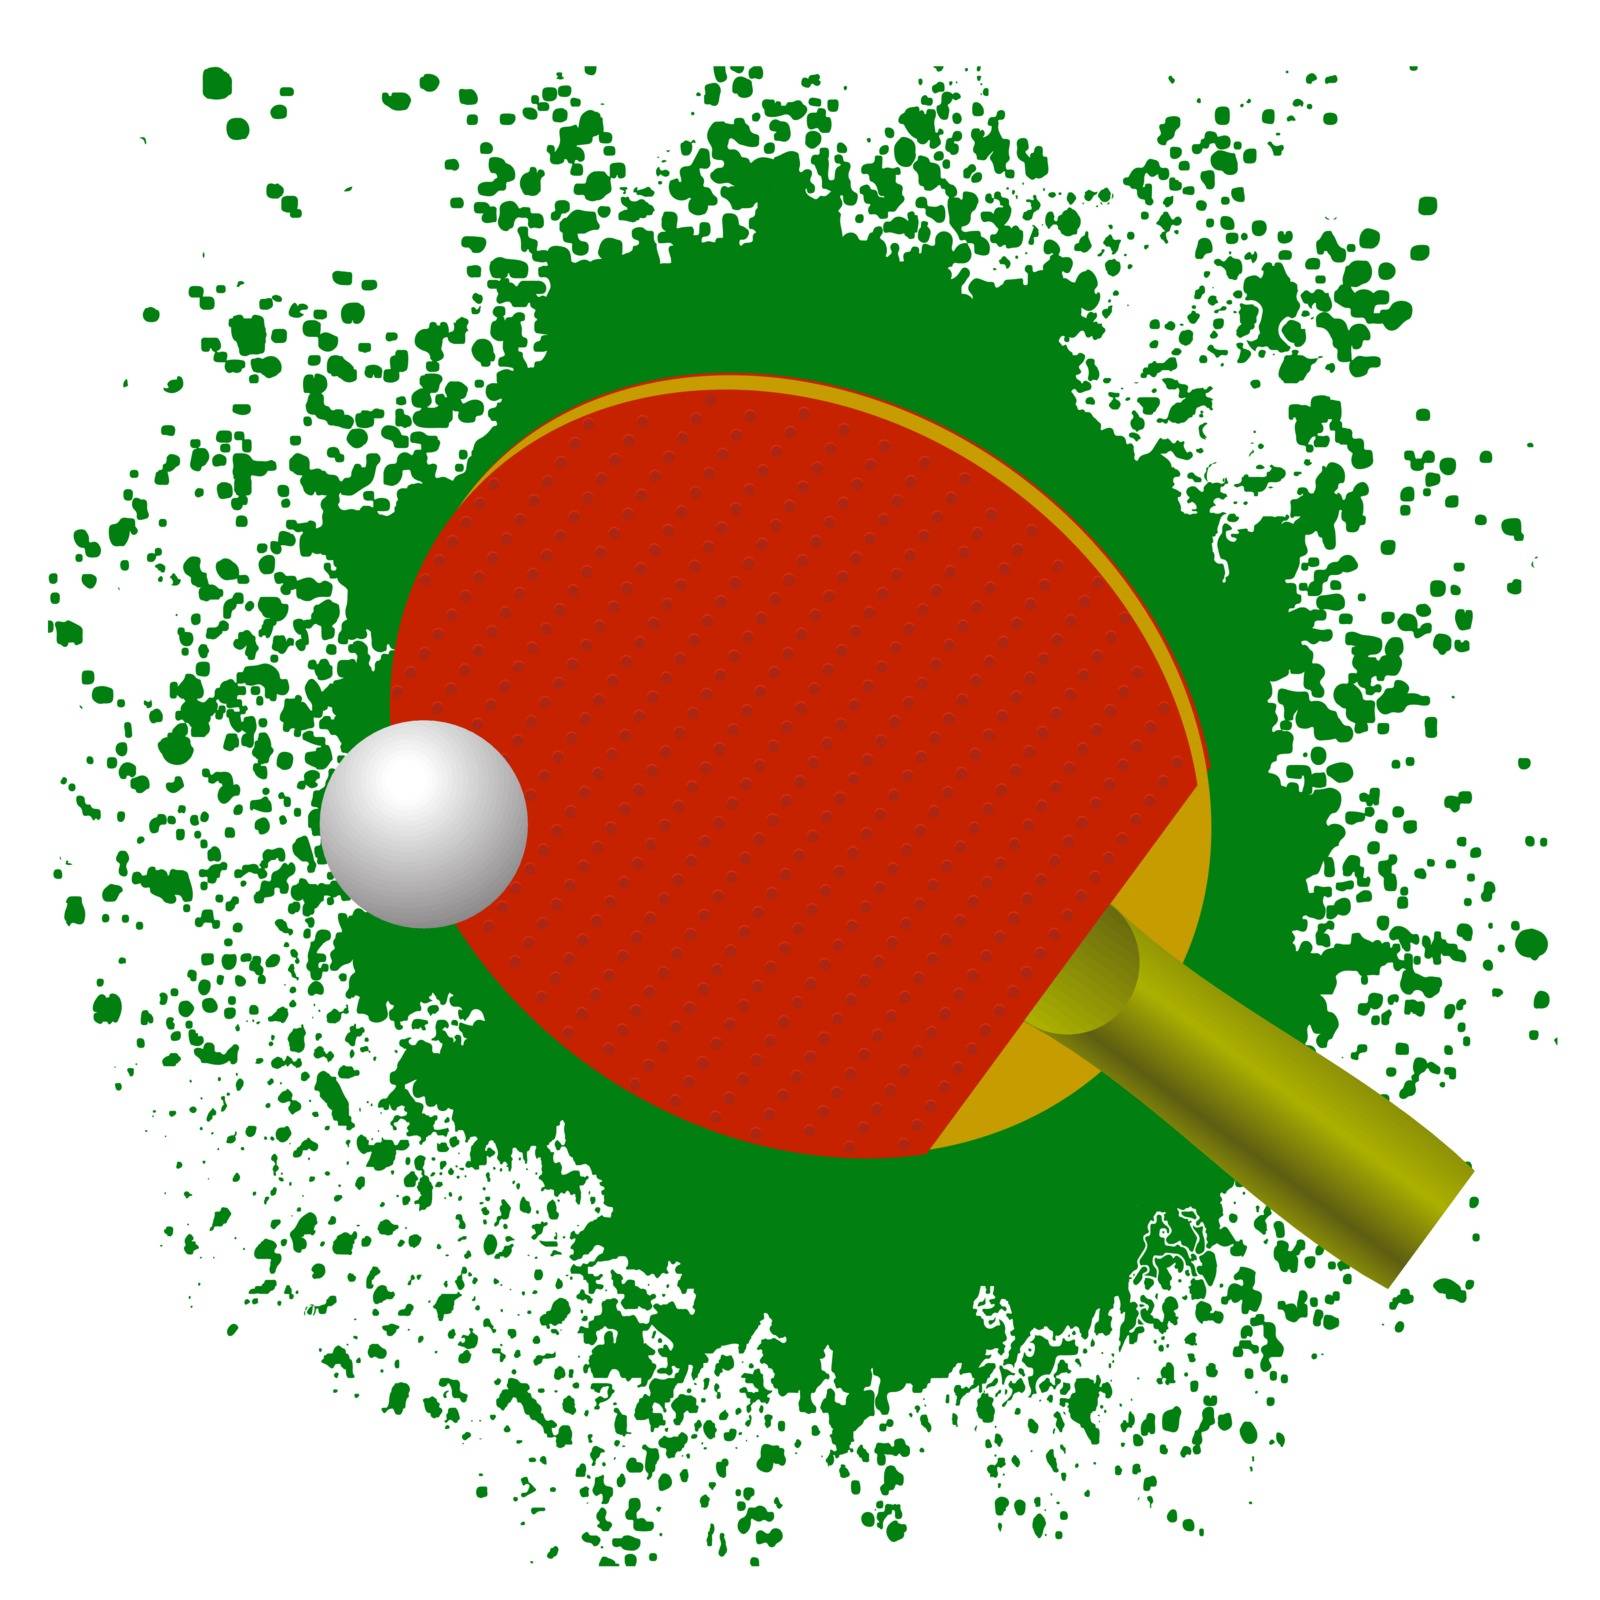 Red Tennis Racket and Plastic Ball on Green Splatter Background